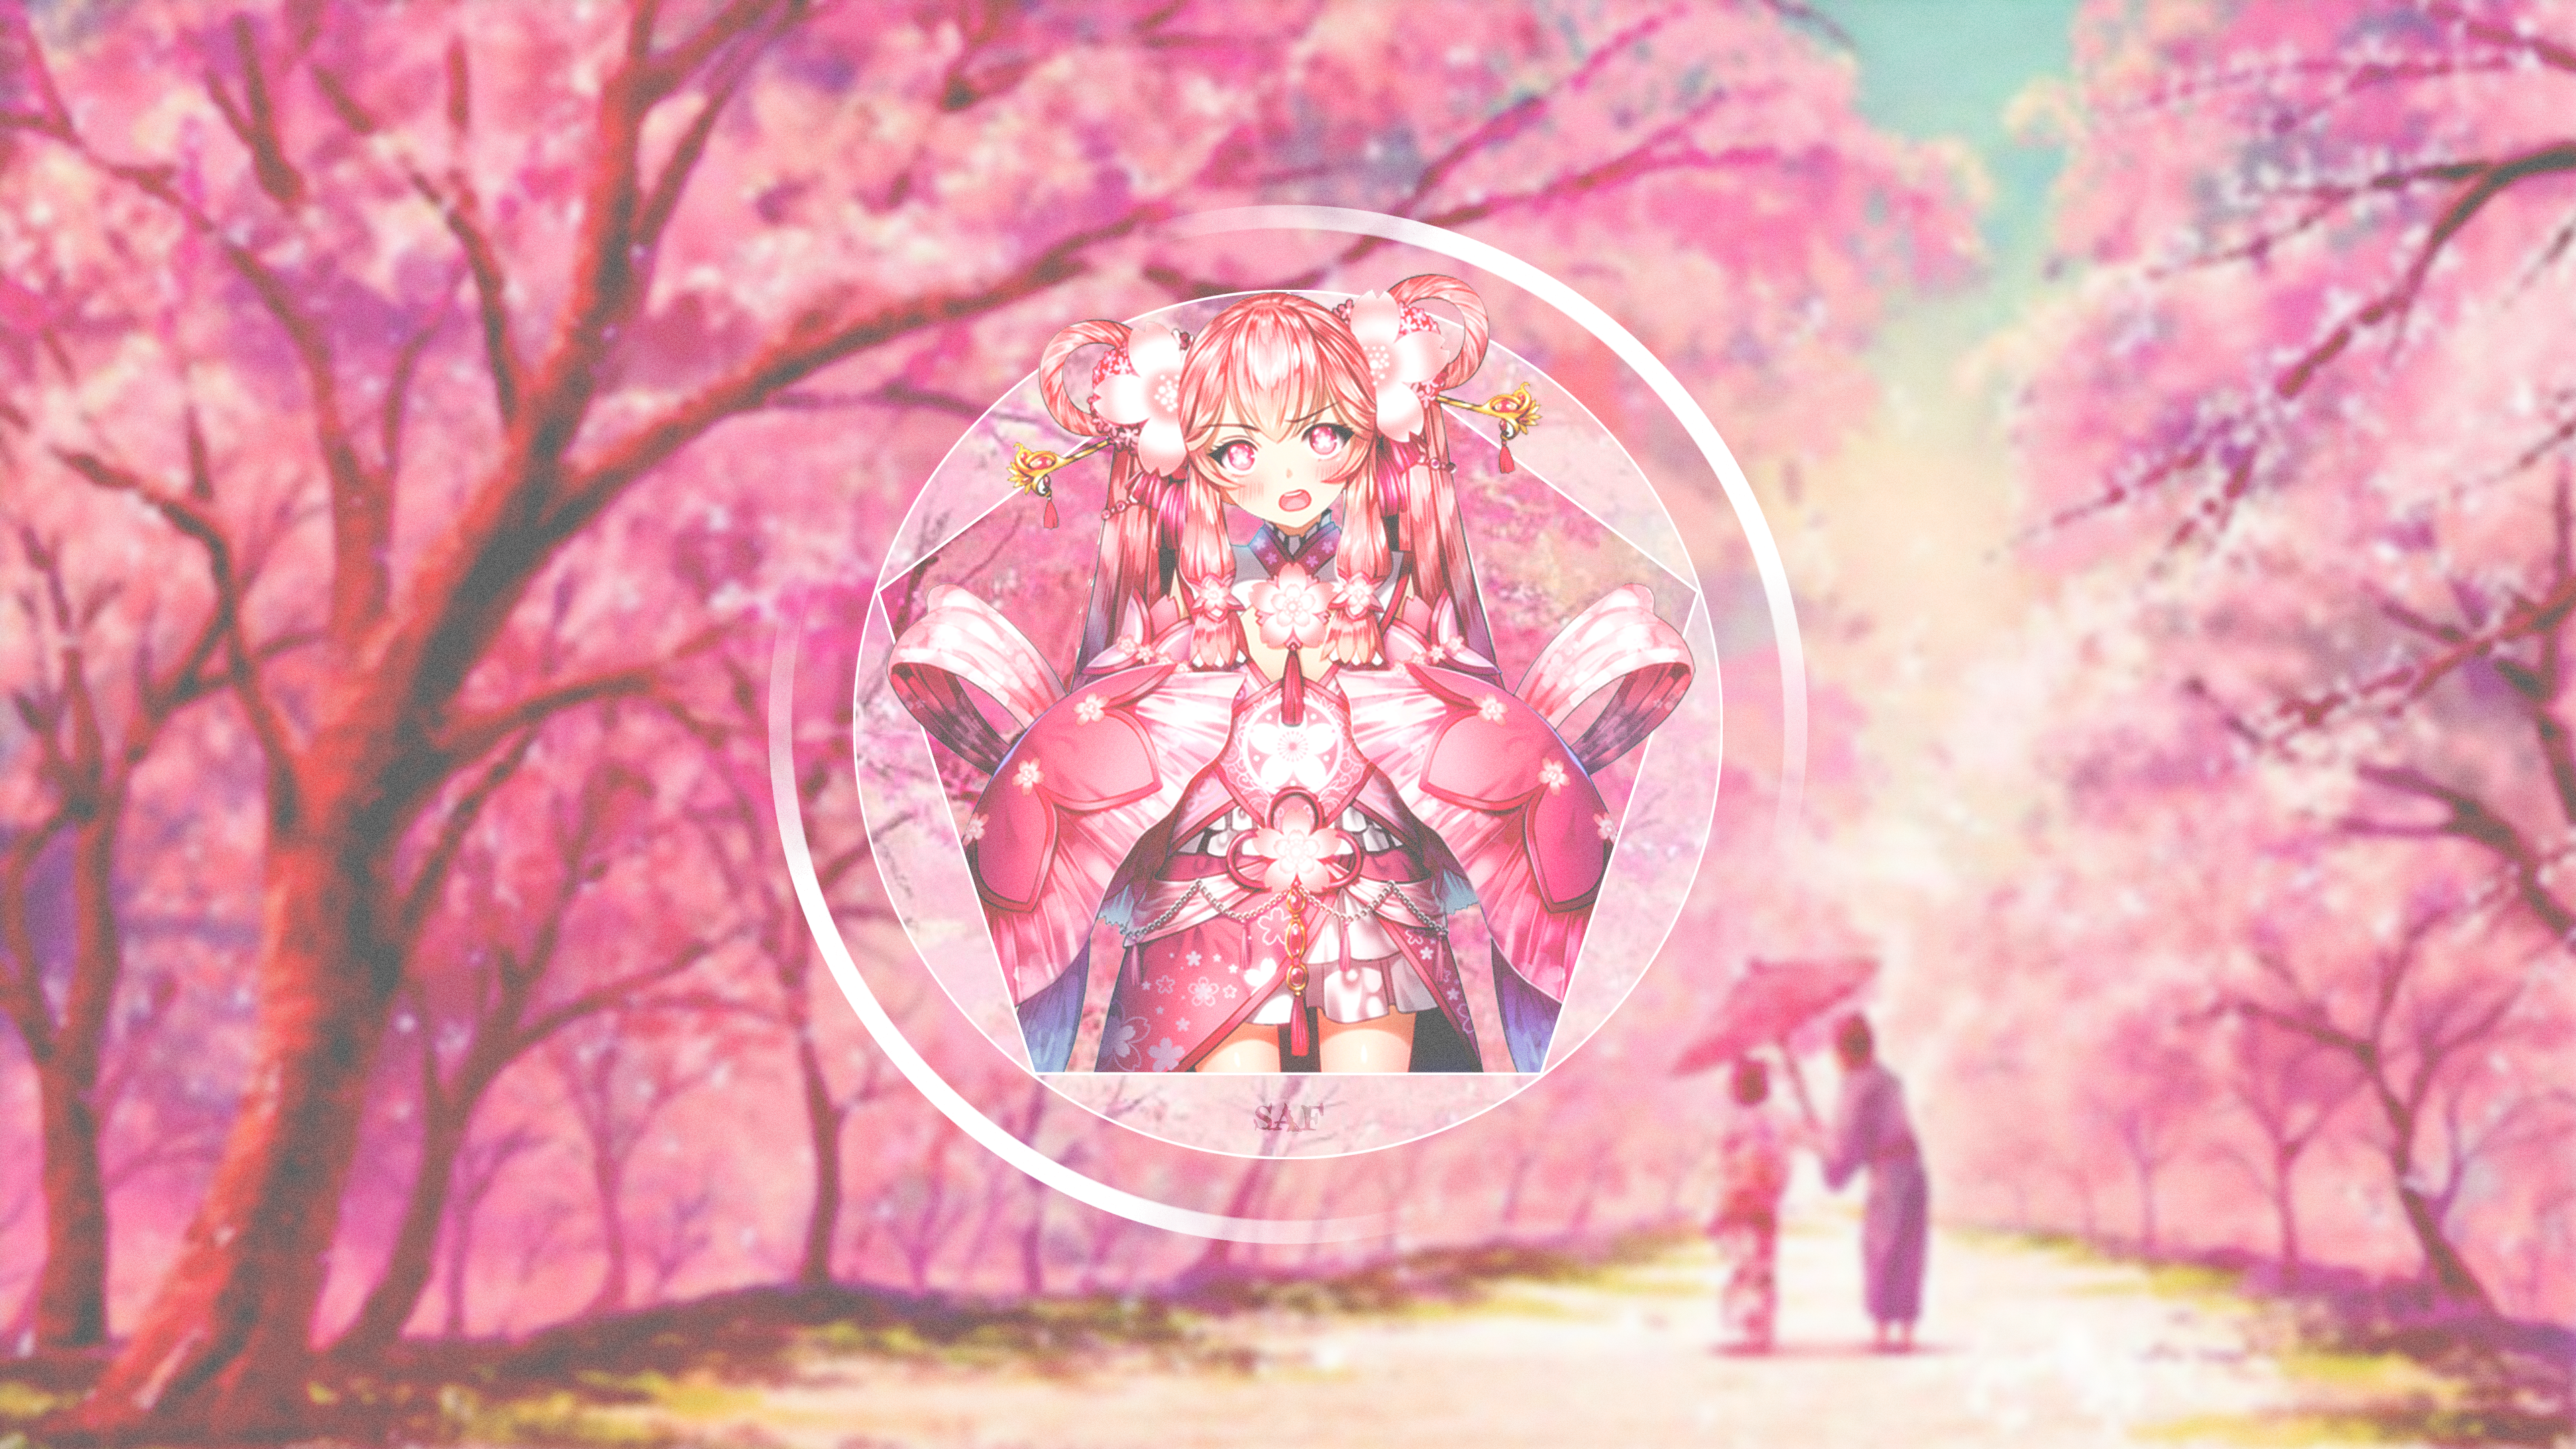 Anime 3840x2160 anime girls fan art pink cherry blossom picture-in-picture